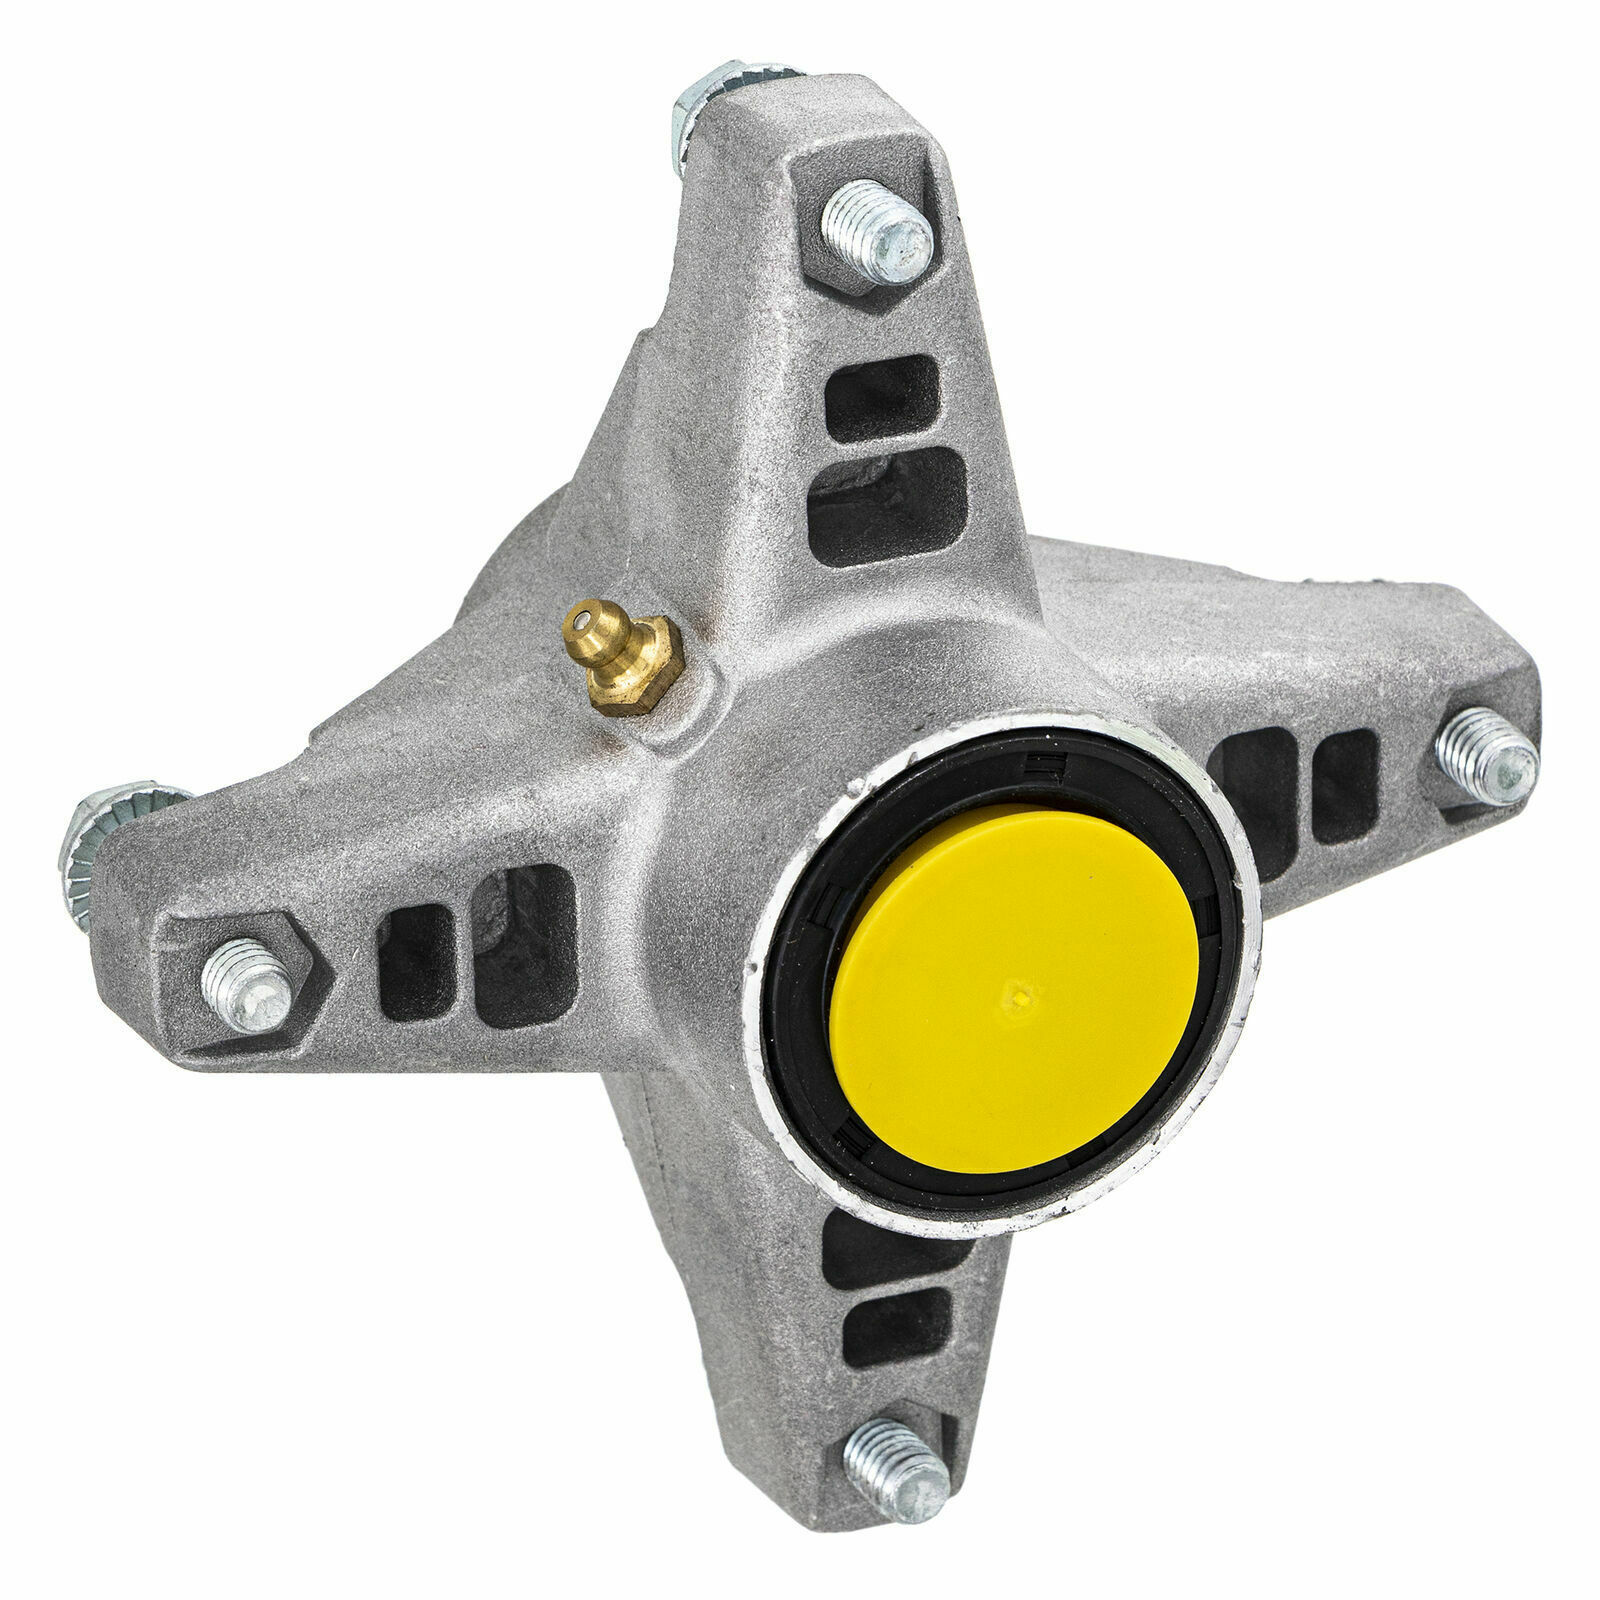 Primary image for Deck Spindle for Cub Cadet Fits MTD 38 54 Inch Deck 2146 918-3129C 918-04426